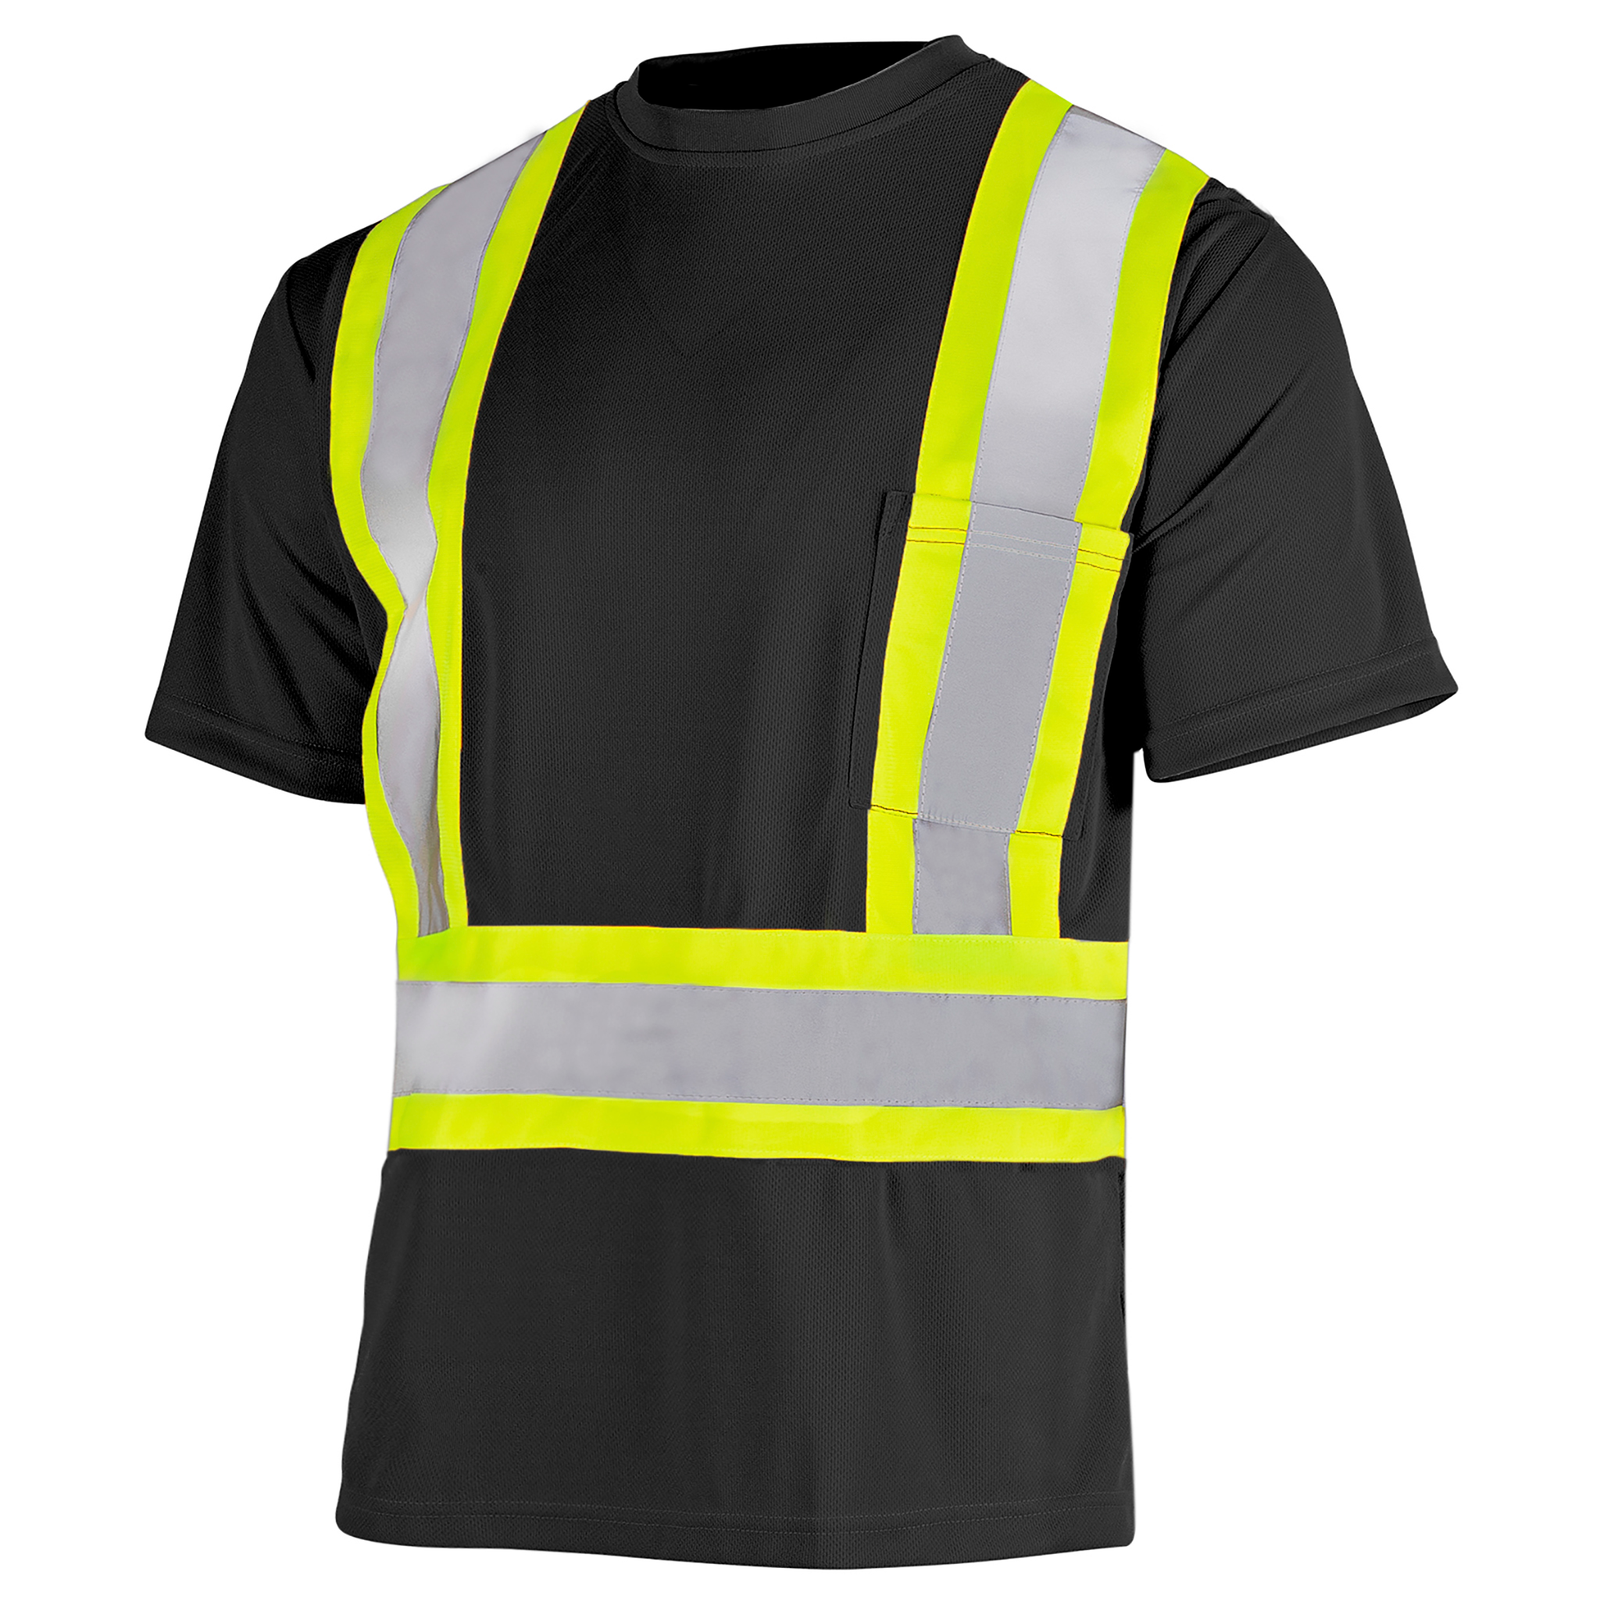 Diagonal view of the JORESTECH short sleeve Hi-vis reflective two tone safety black and yellow pocket shirt ANSI and CSA compliant. Birds eye safety shirt.